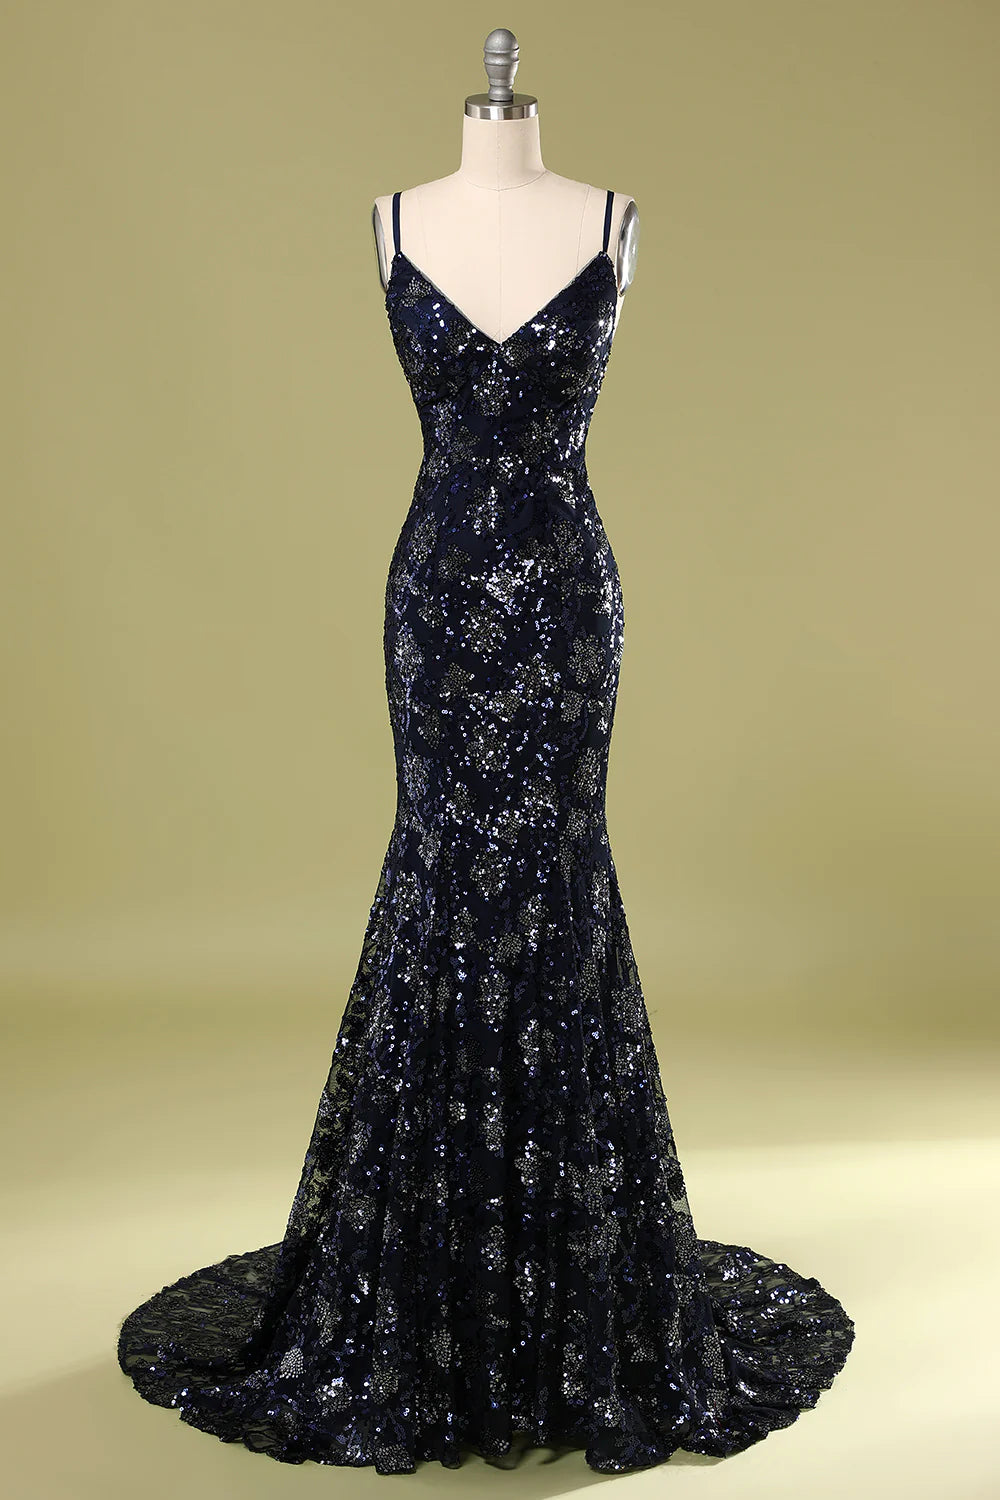 Navy Mermaid Long Prom Dress With Beading Sequins